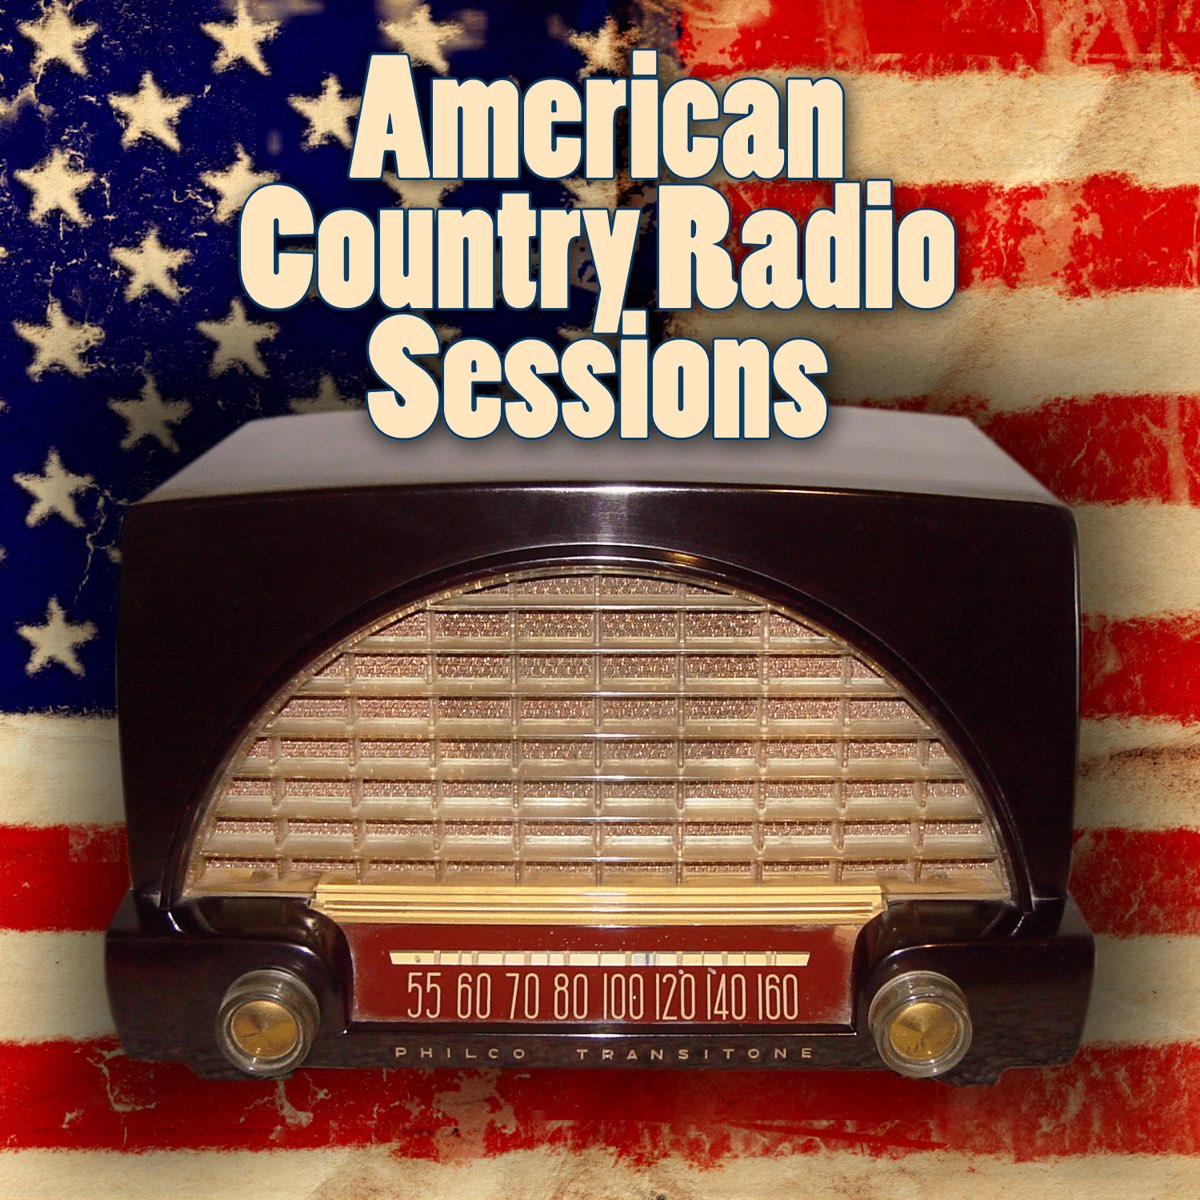 American Country Radio Sessions - Album by Various Artists - Apple Music